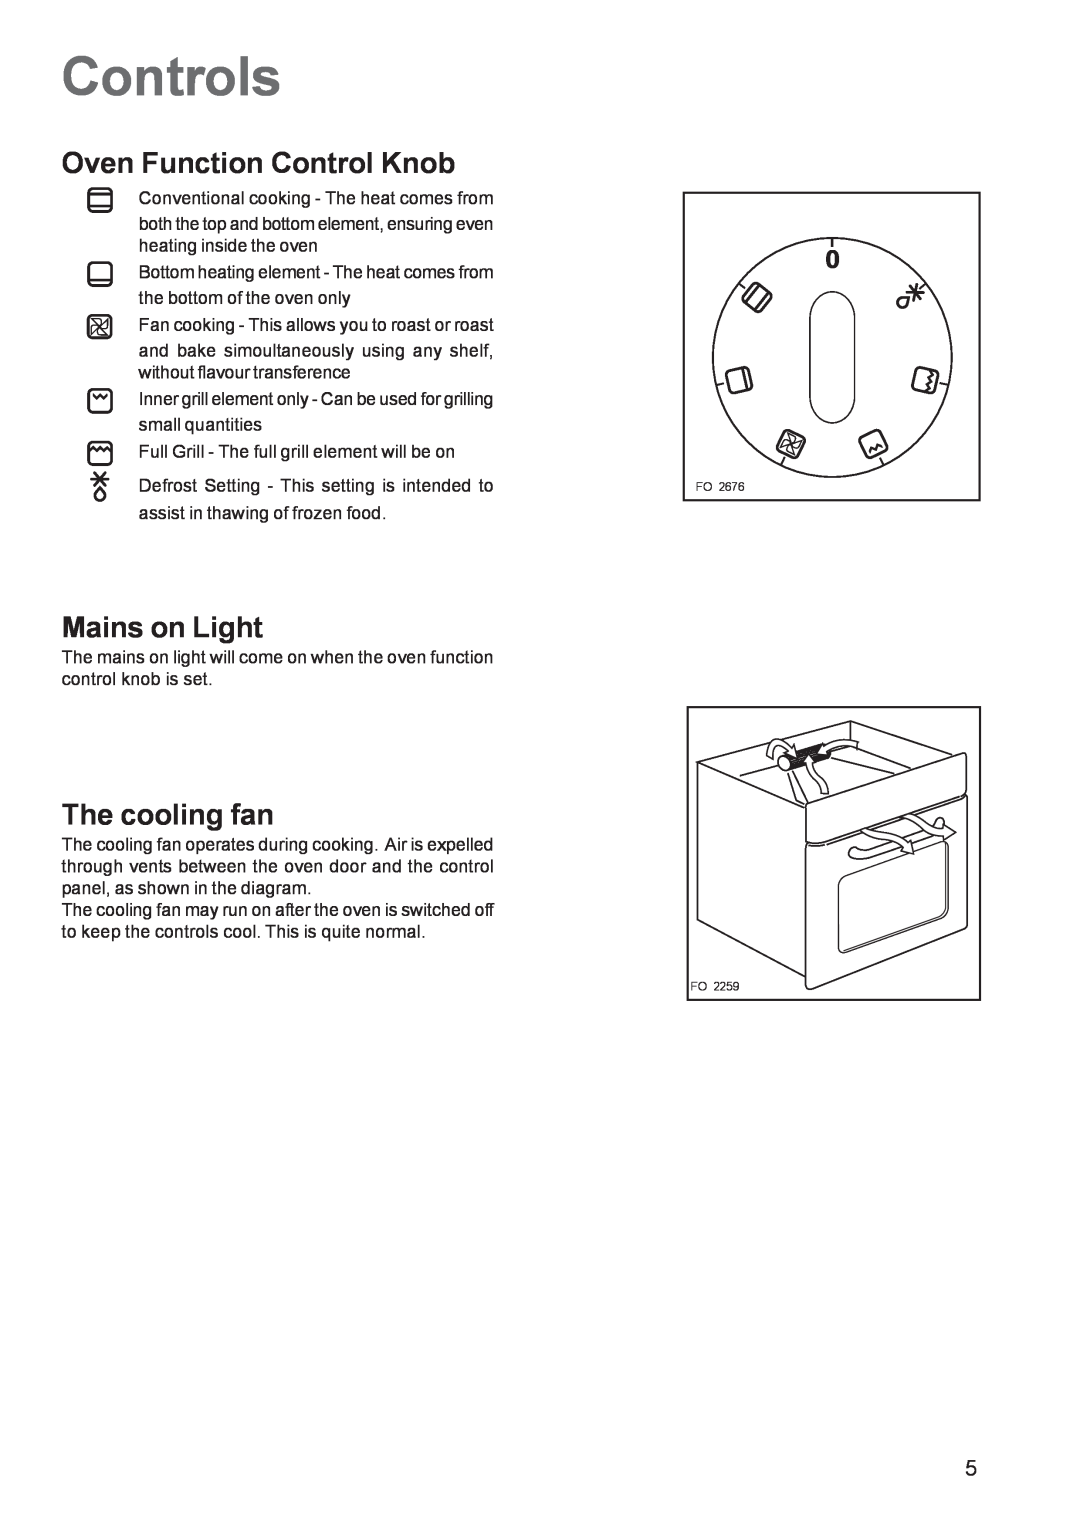 Zanussi ZBS 663 manual Controls, Oven Function Control Knob, Mains on Light, The cooling fan 